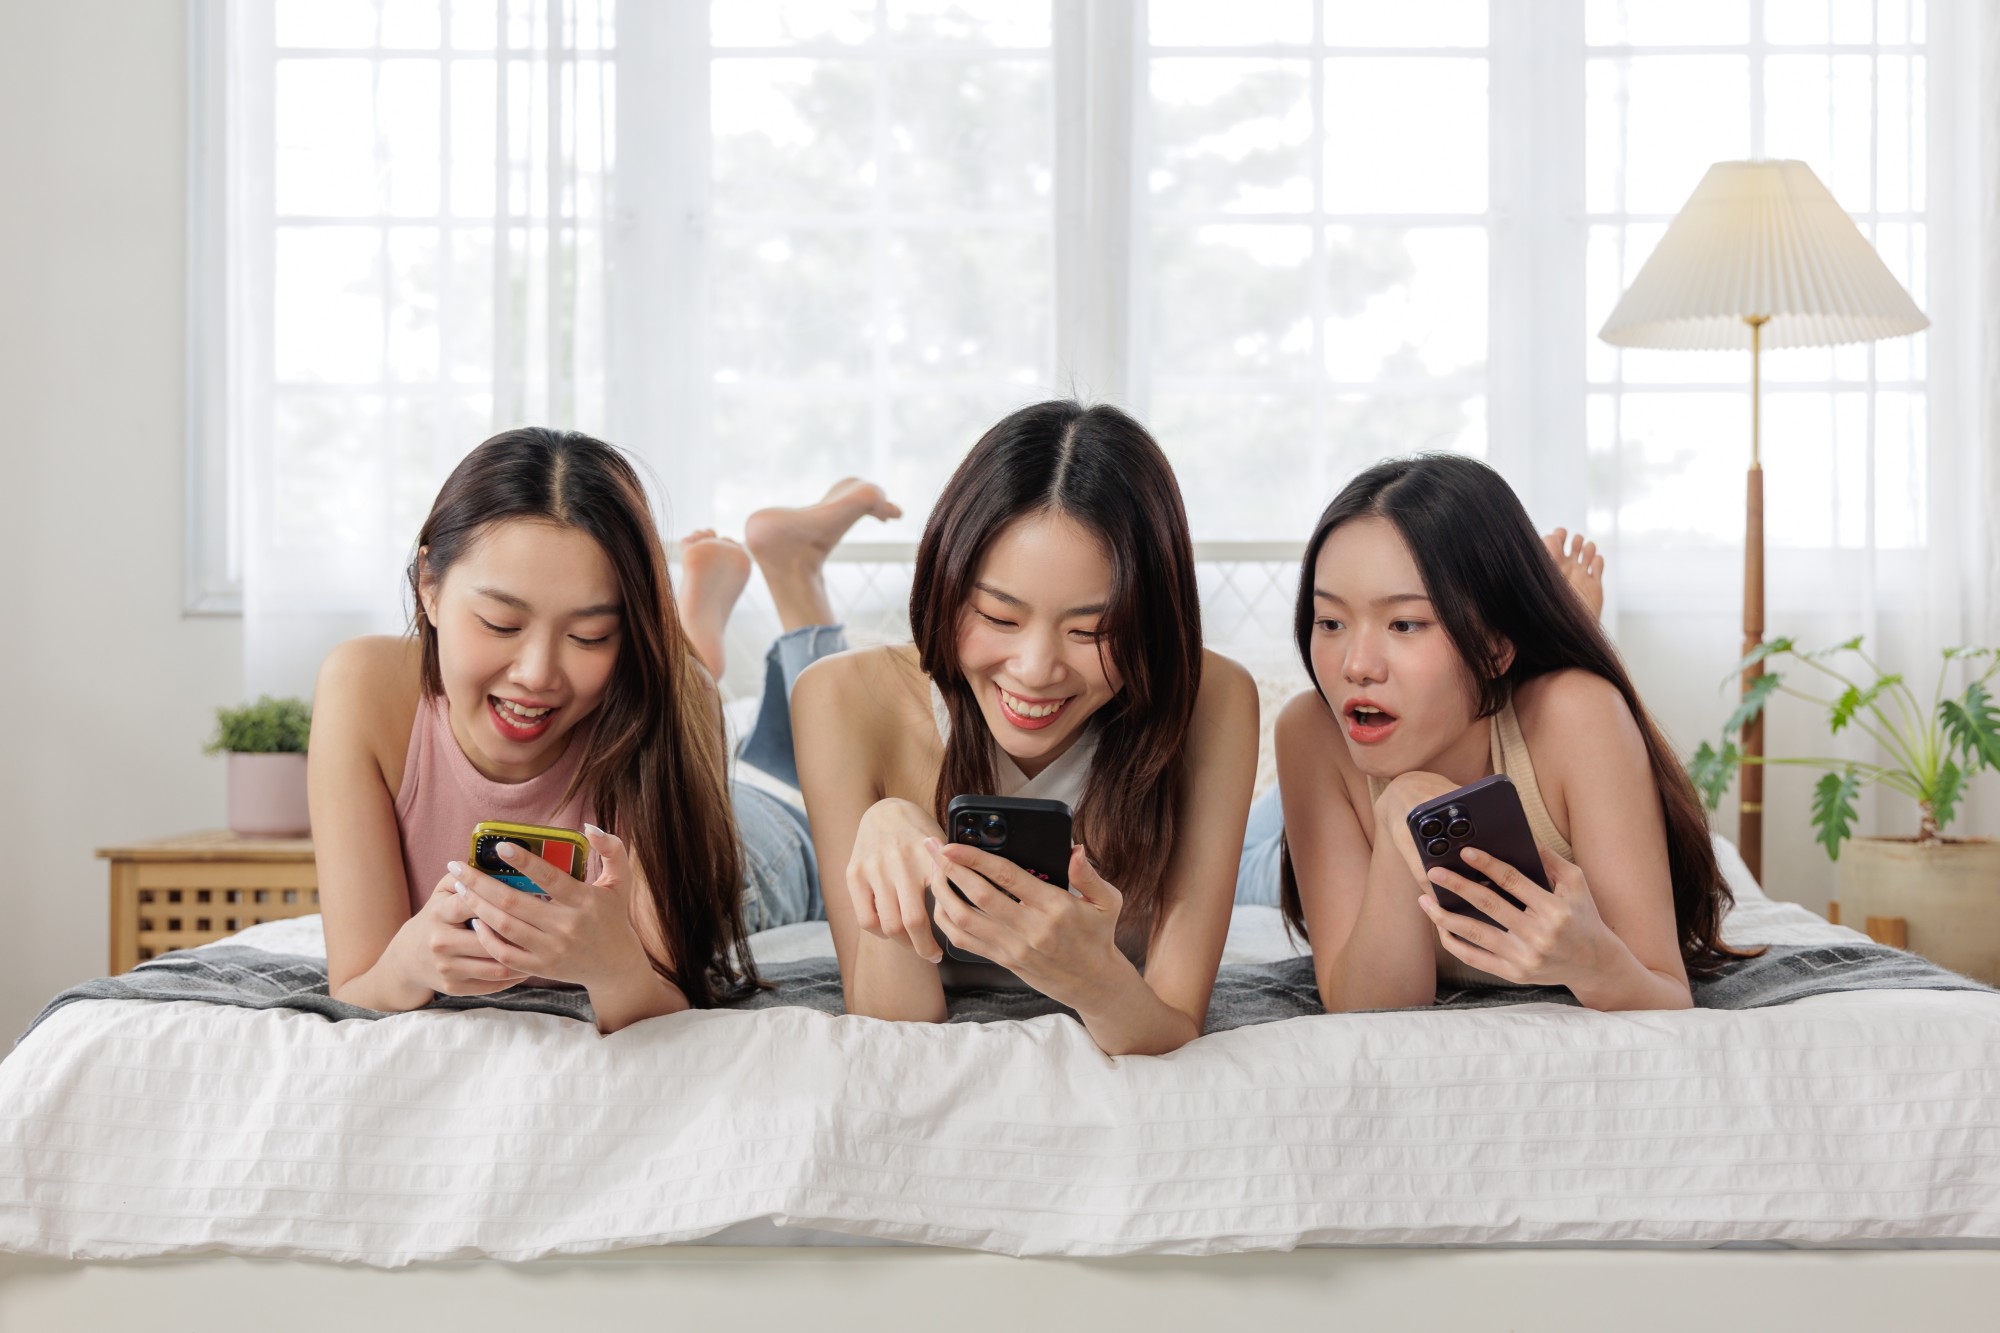 For young people in China, chat icons are a very nuanced affair and need to be considered carefully before sending. Photo: Shutterstock